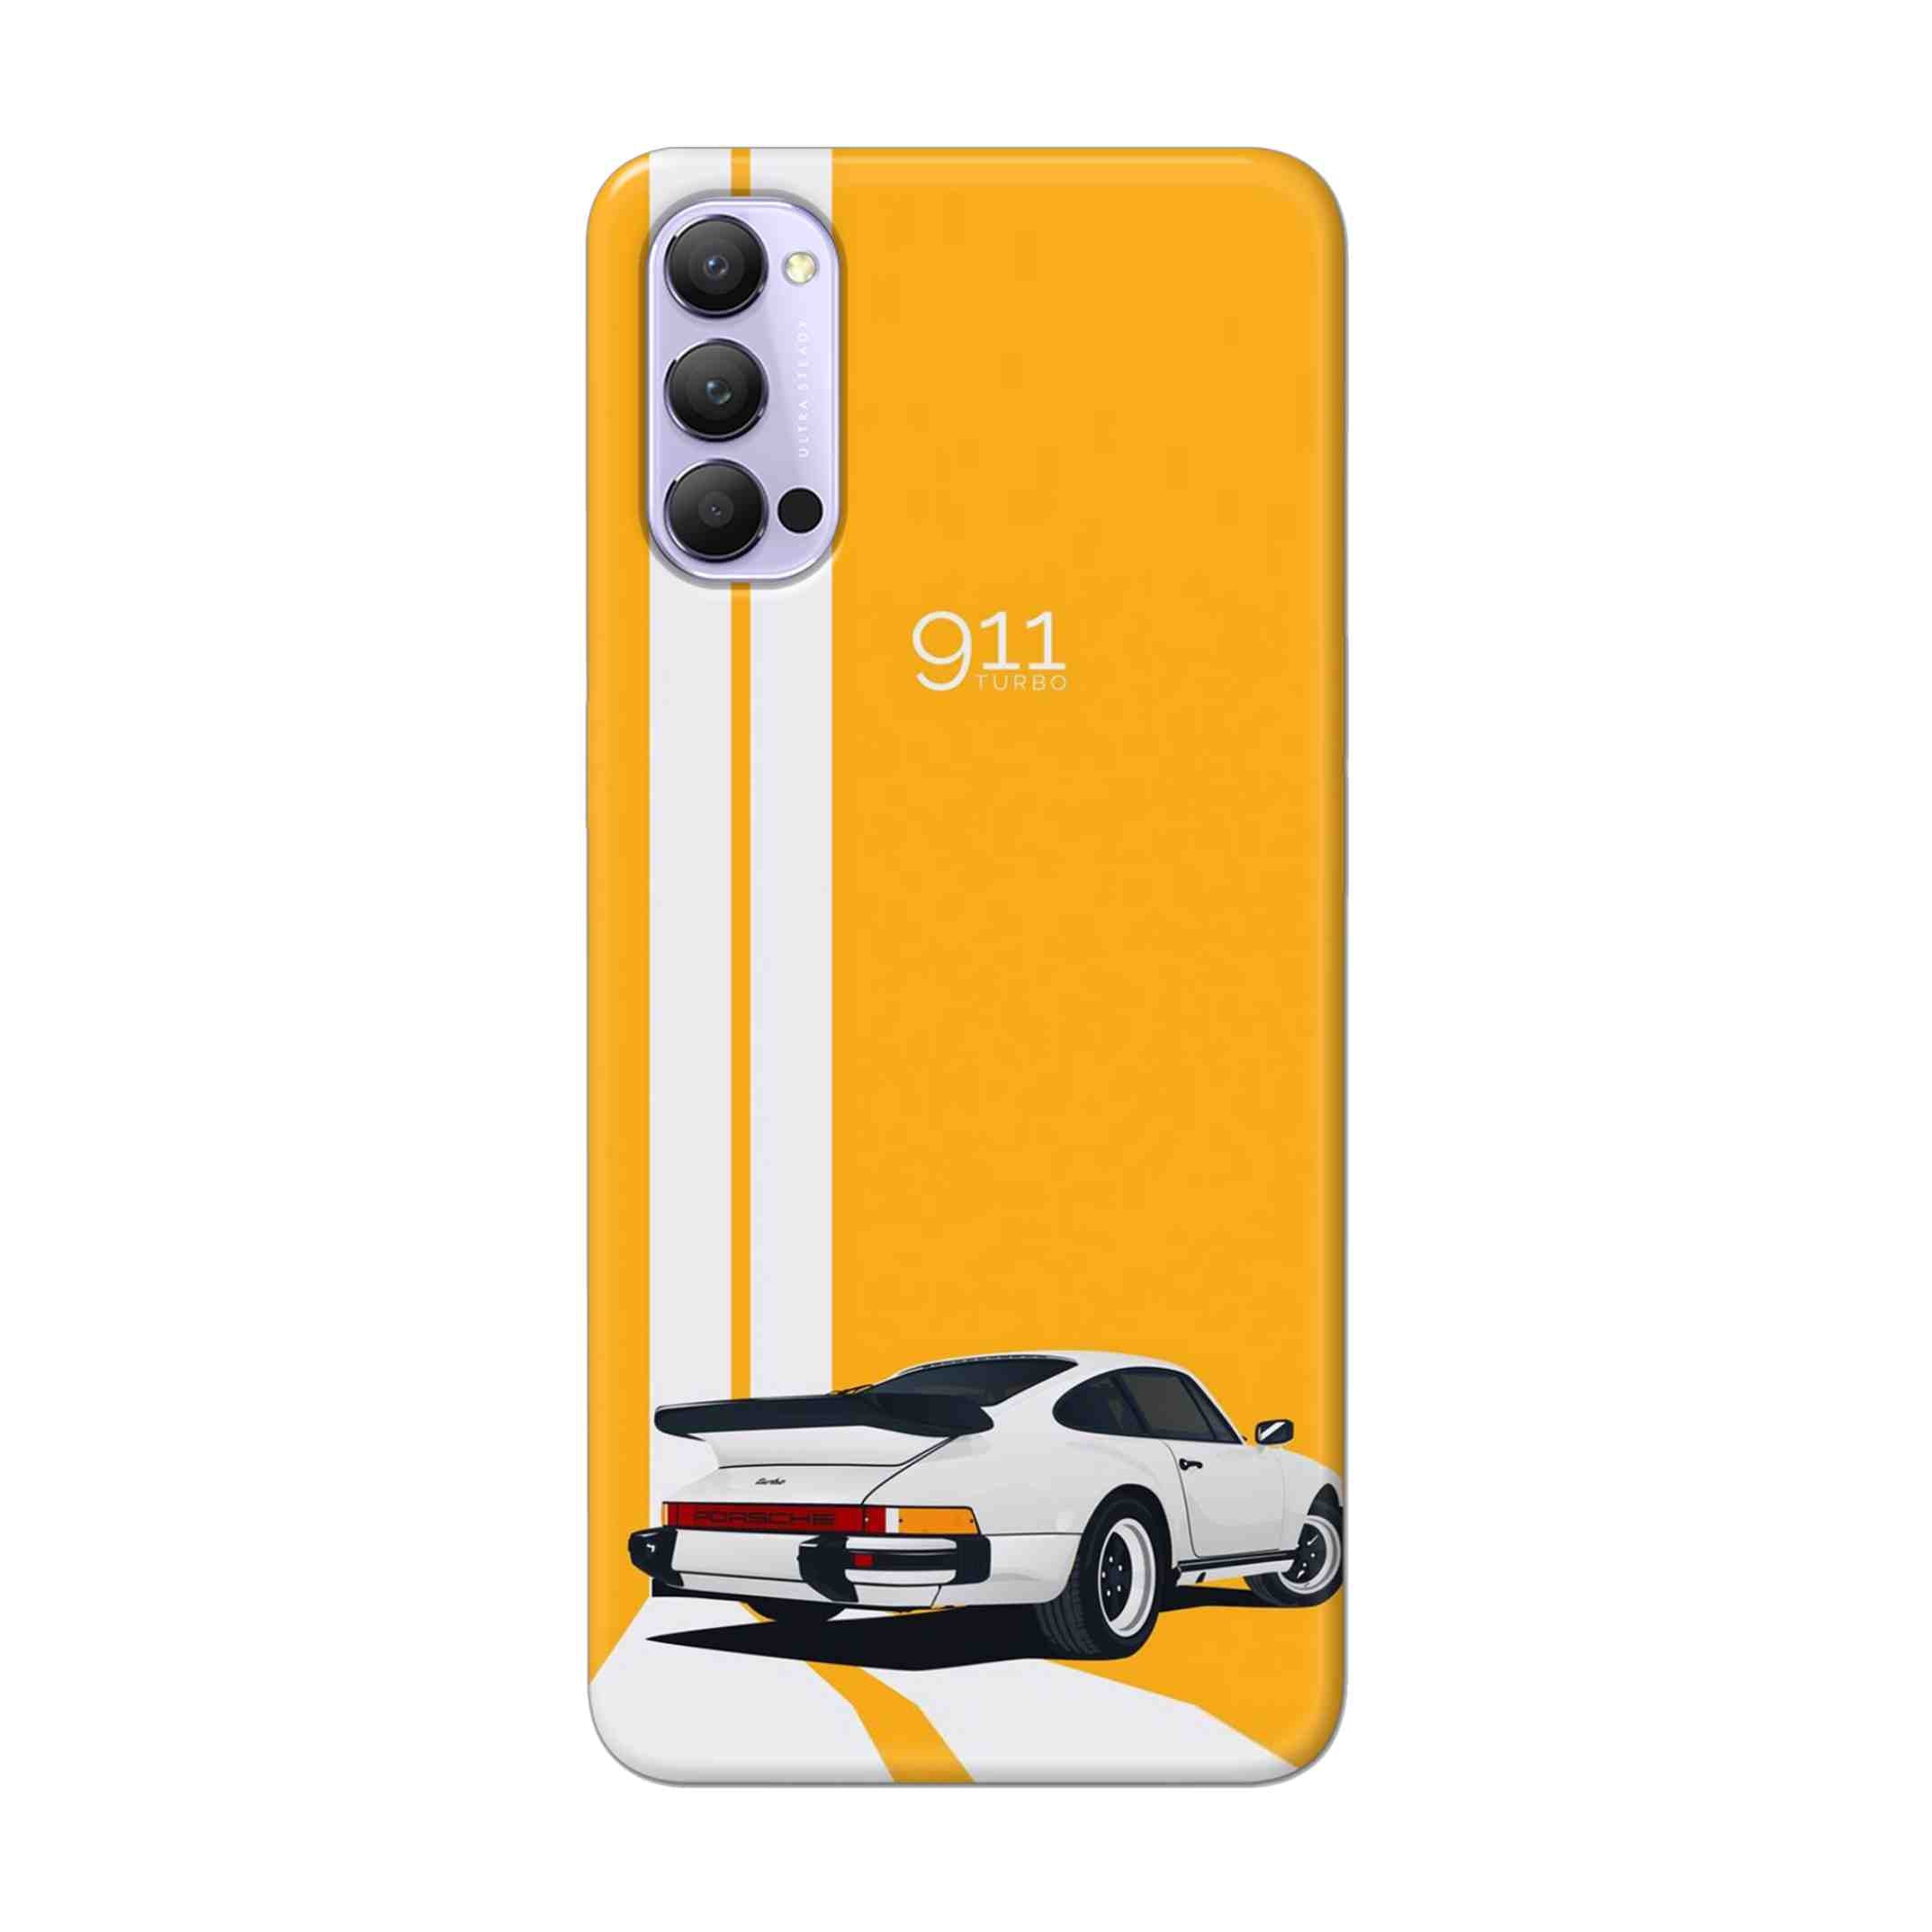 Buy 911 Gt Porche Hard Back Mobile Phone Case Cover For Oppo Reno 4 Pro Online